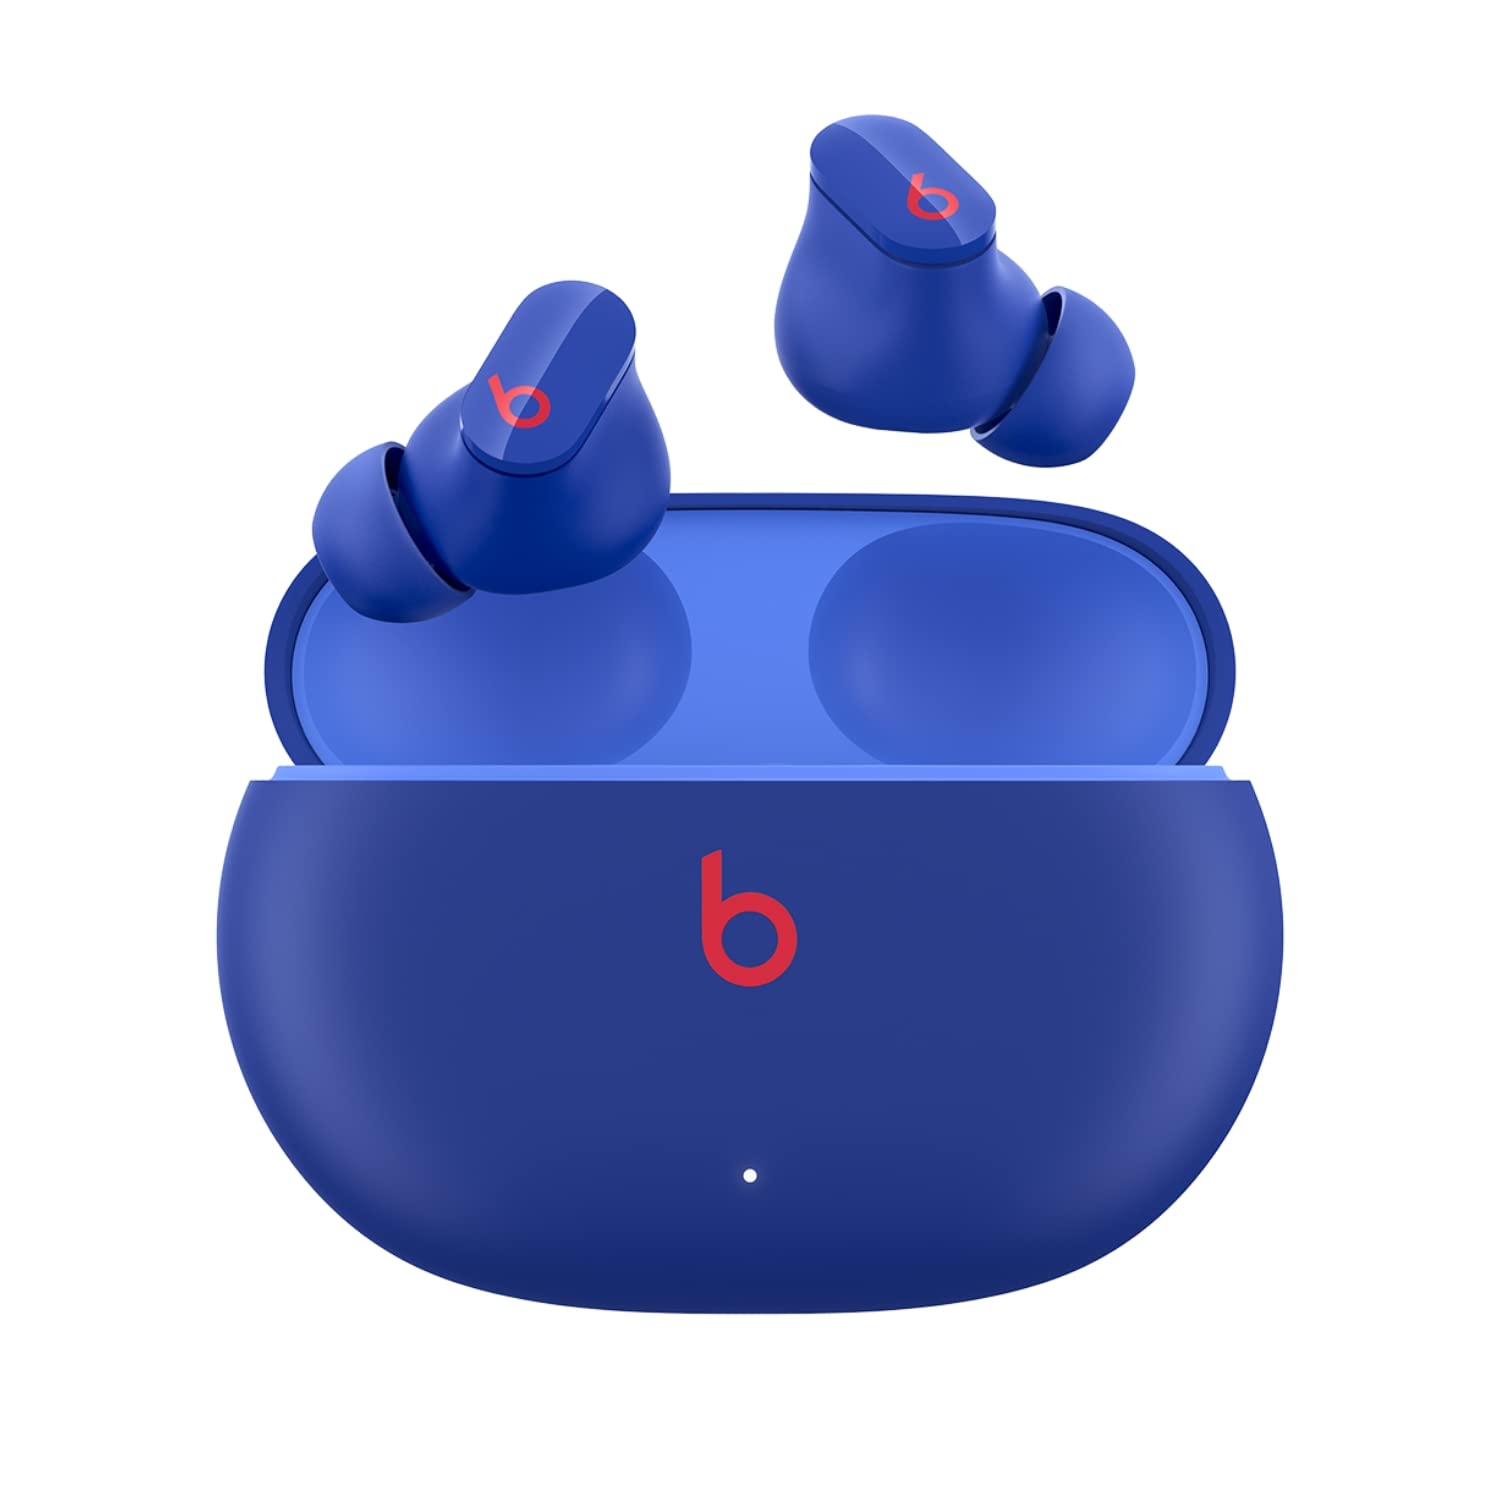 Beats Studio Buds - True Wireless Noise Cancelling Earbuds - Compatible with Apple & Android, Built-in Microphone, IPX4 Rating, Sweat Resistant Earphones, Class 1 Bluetooth Headphones - Ocean Blue